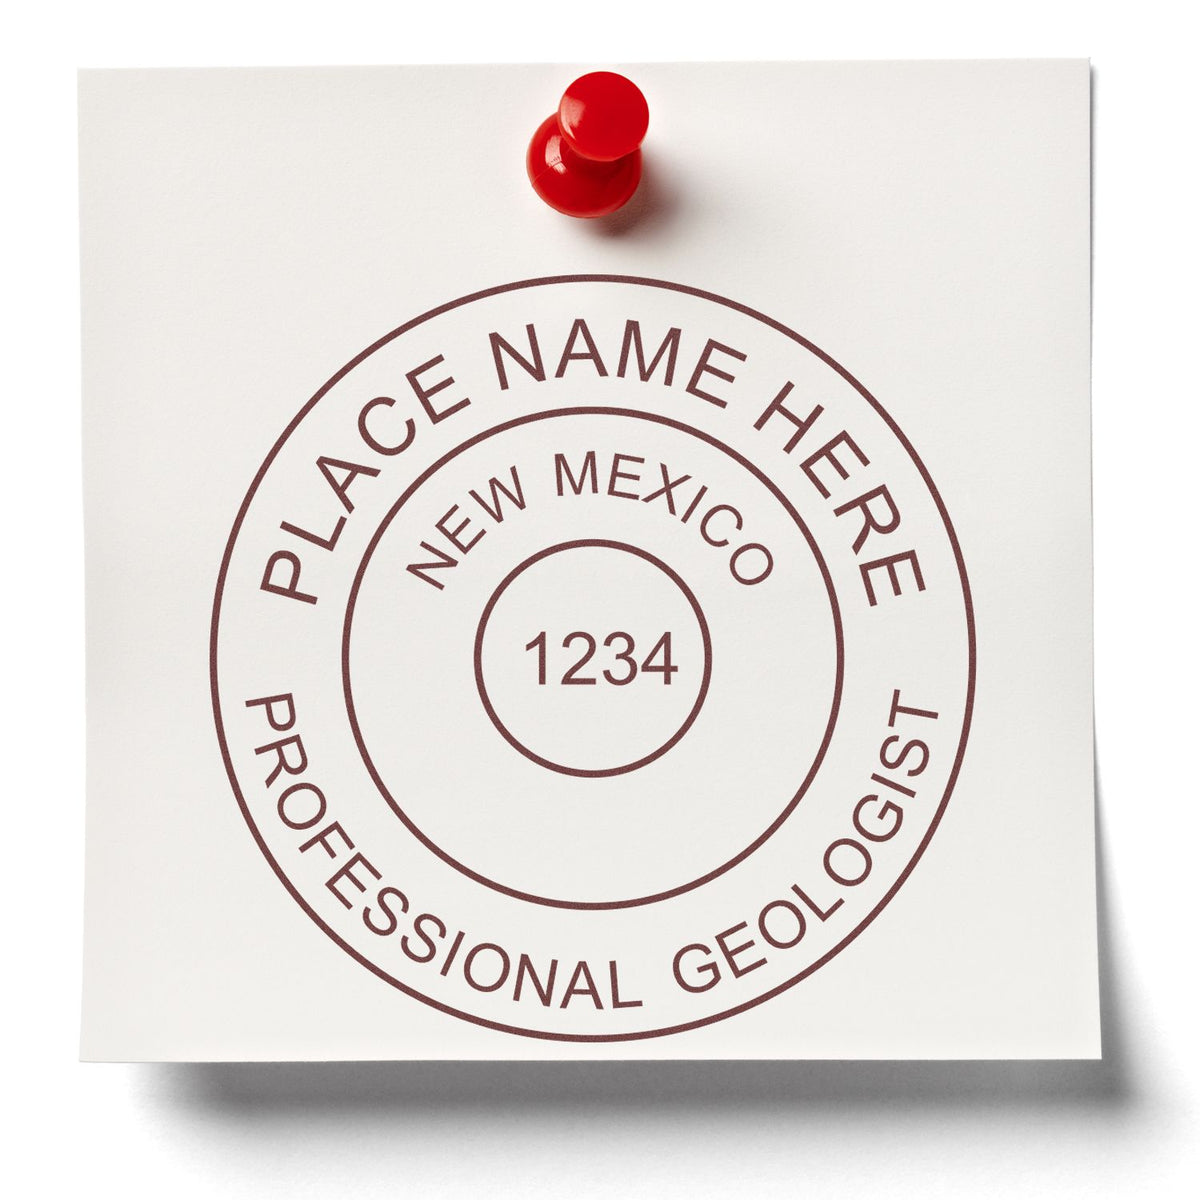 Another Example of a stamped impression of the Digital New Mexico Geologist Stamp, Electronic Seal for New Mexico Geologist on a office form